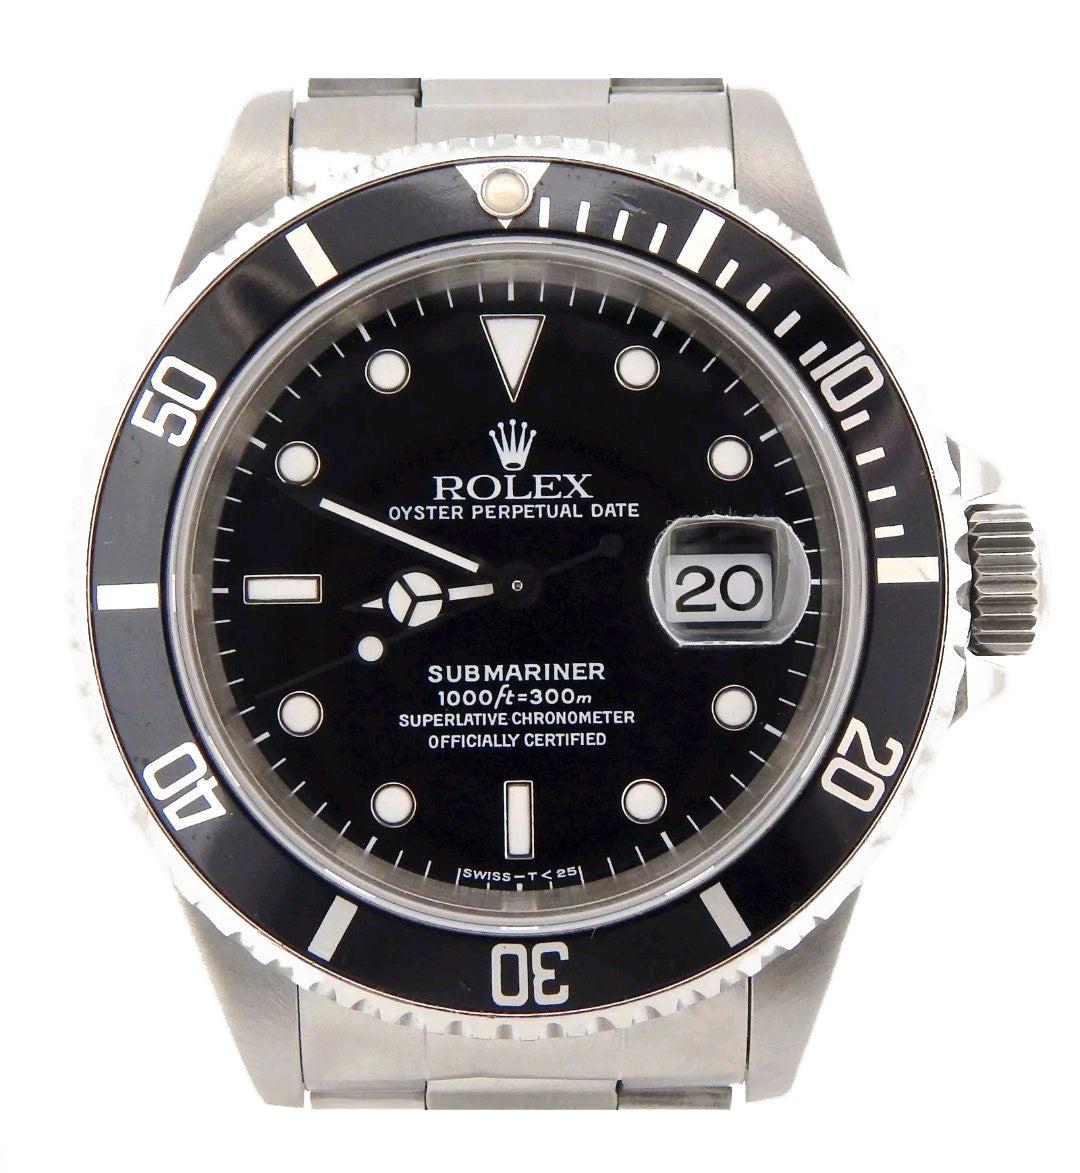 Brand - Rolex
Model - 16610 Submariner
Gender - Men's
Case Size - 40mm
Dial - Black sub 
Bezel - Steel rotating
Crystal - Saphire
Movement - Automatic Rolex CAL.3135
Band - Steel Oyster
Wrist Size - 8 Inches